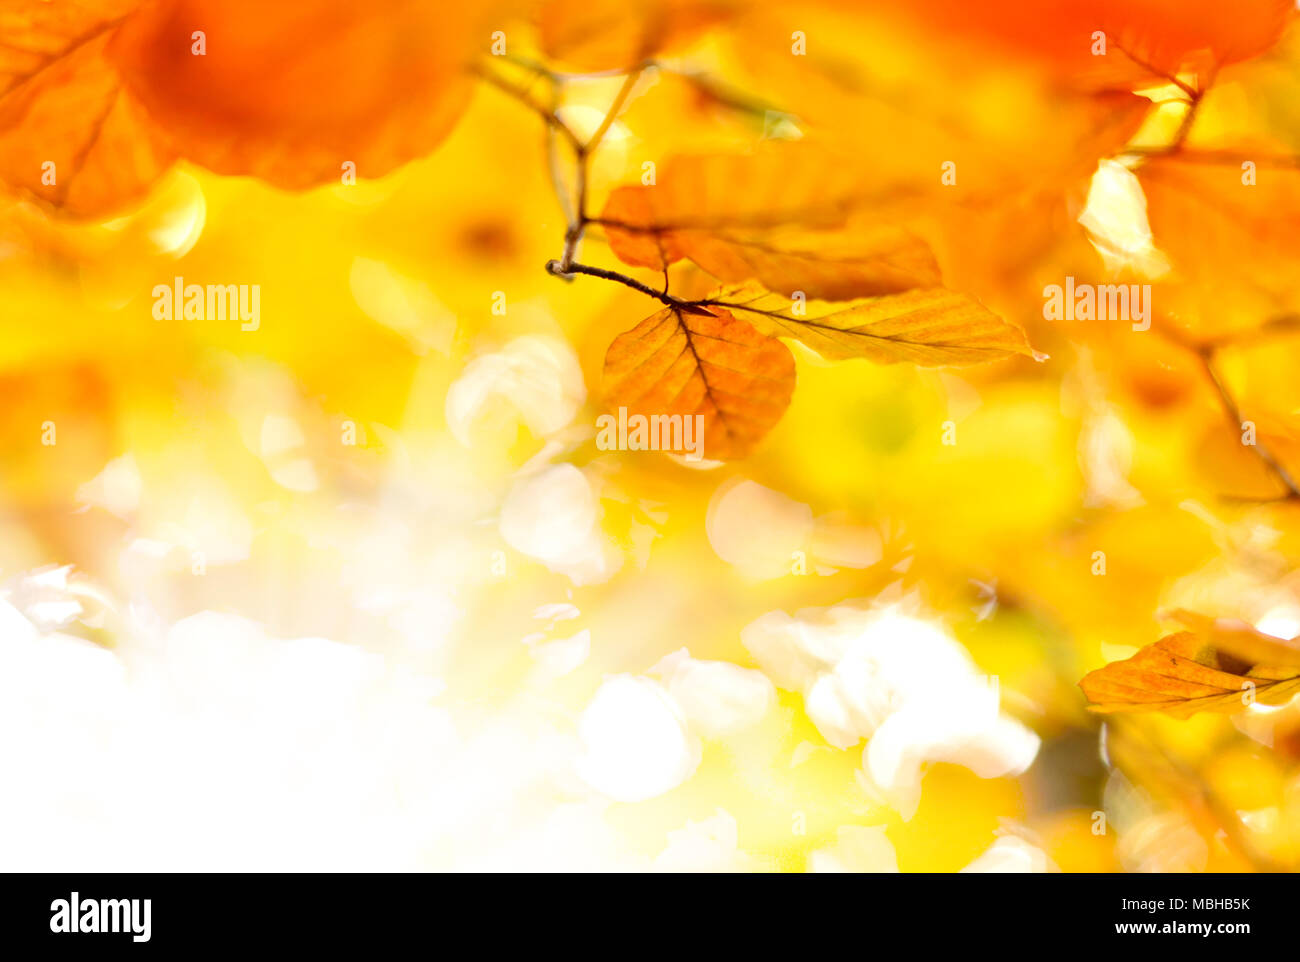 Autumn leaves or foliage background with blur and copy space. Beech leaves, orange colored nature frame. Stock Photo